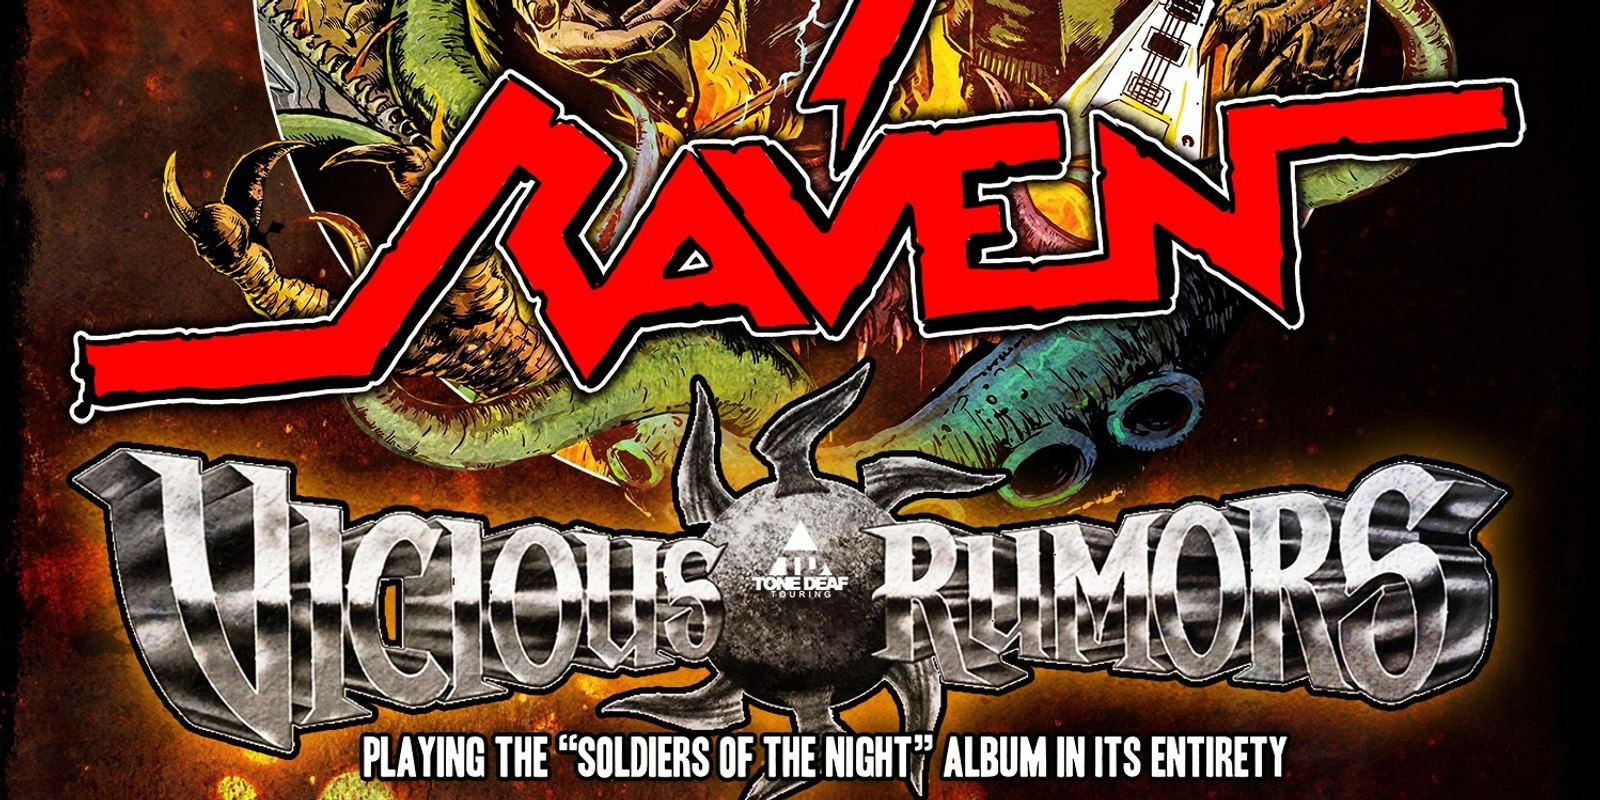 Banner image for Raven, Vicious Rumors, Lutharo, Wicked